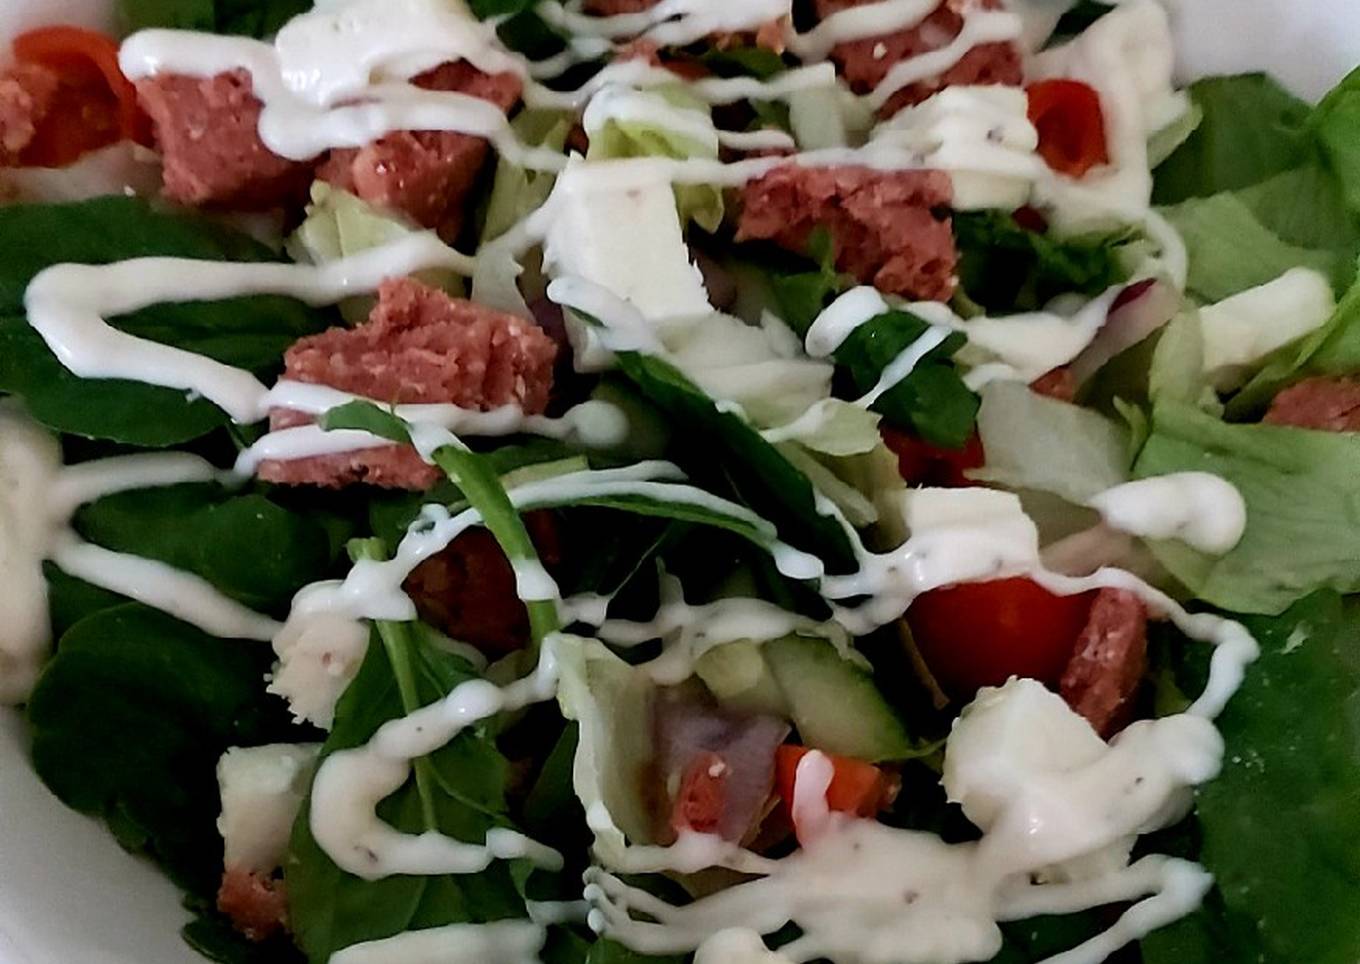 my corned beef spinach salad